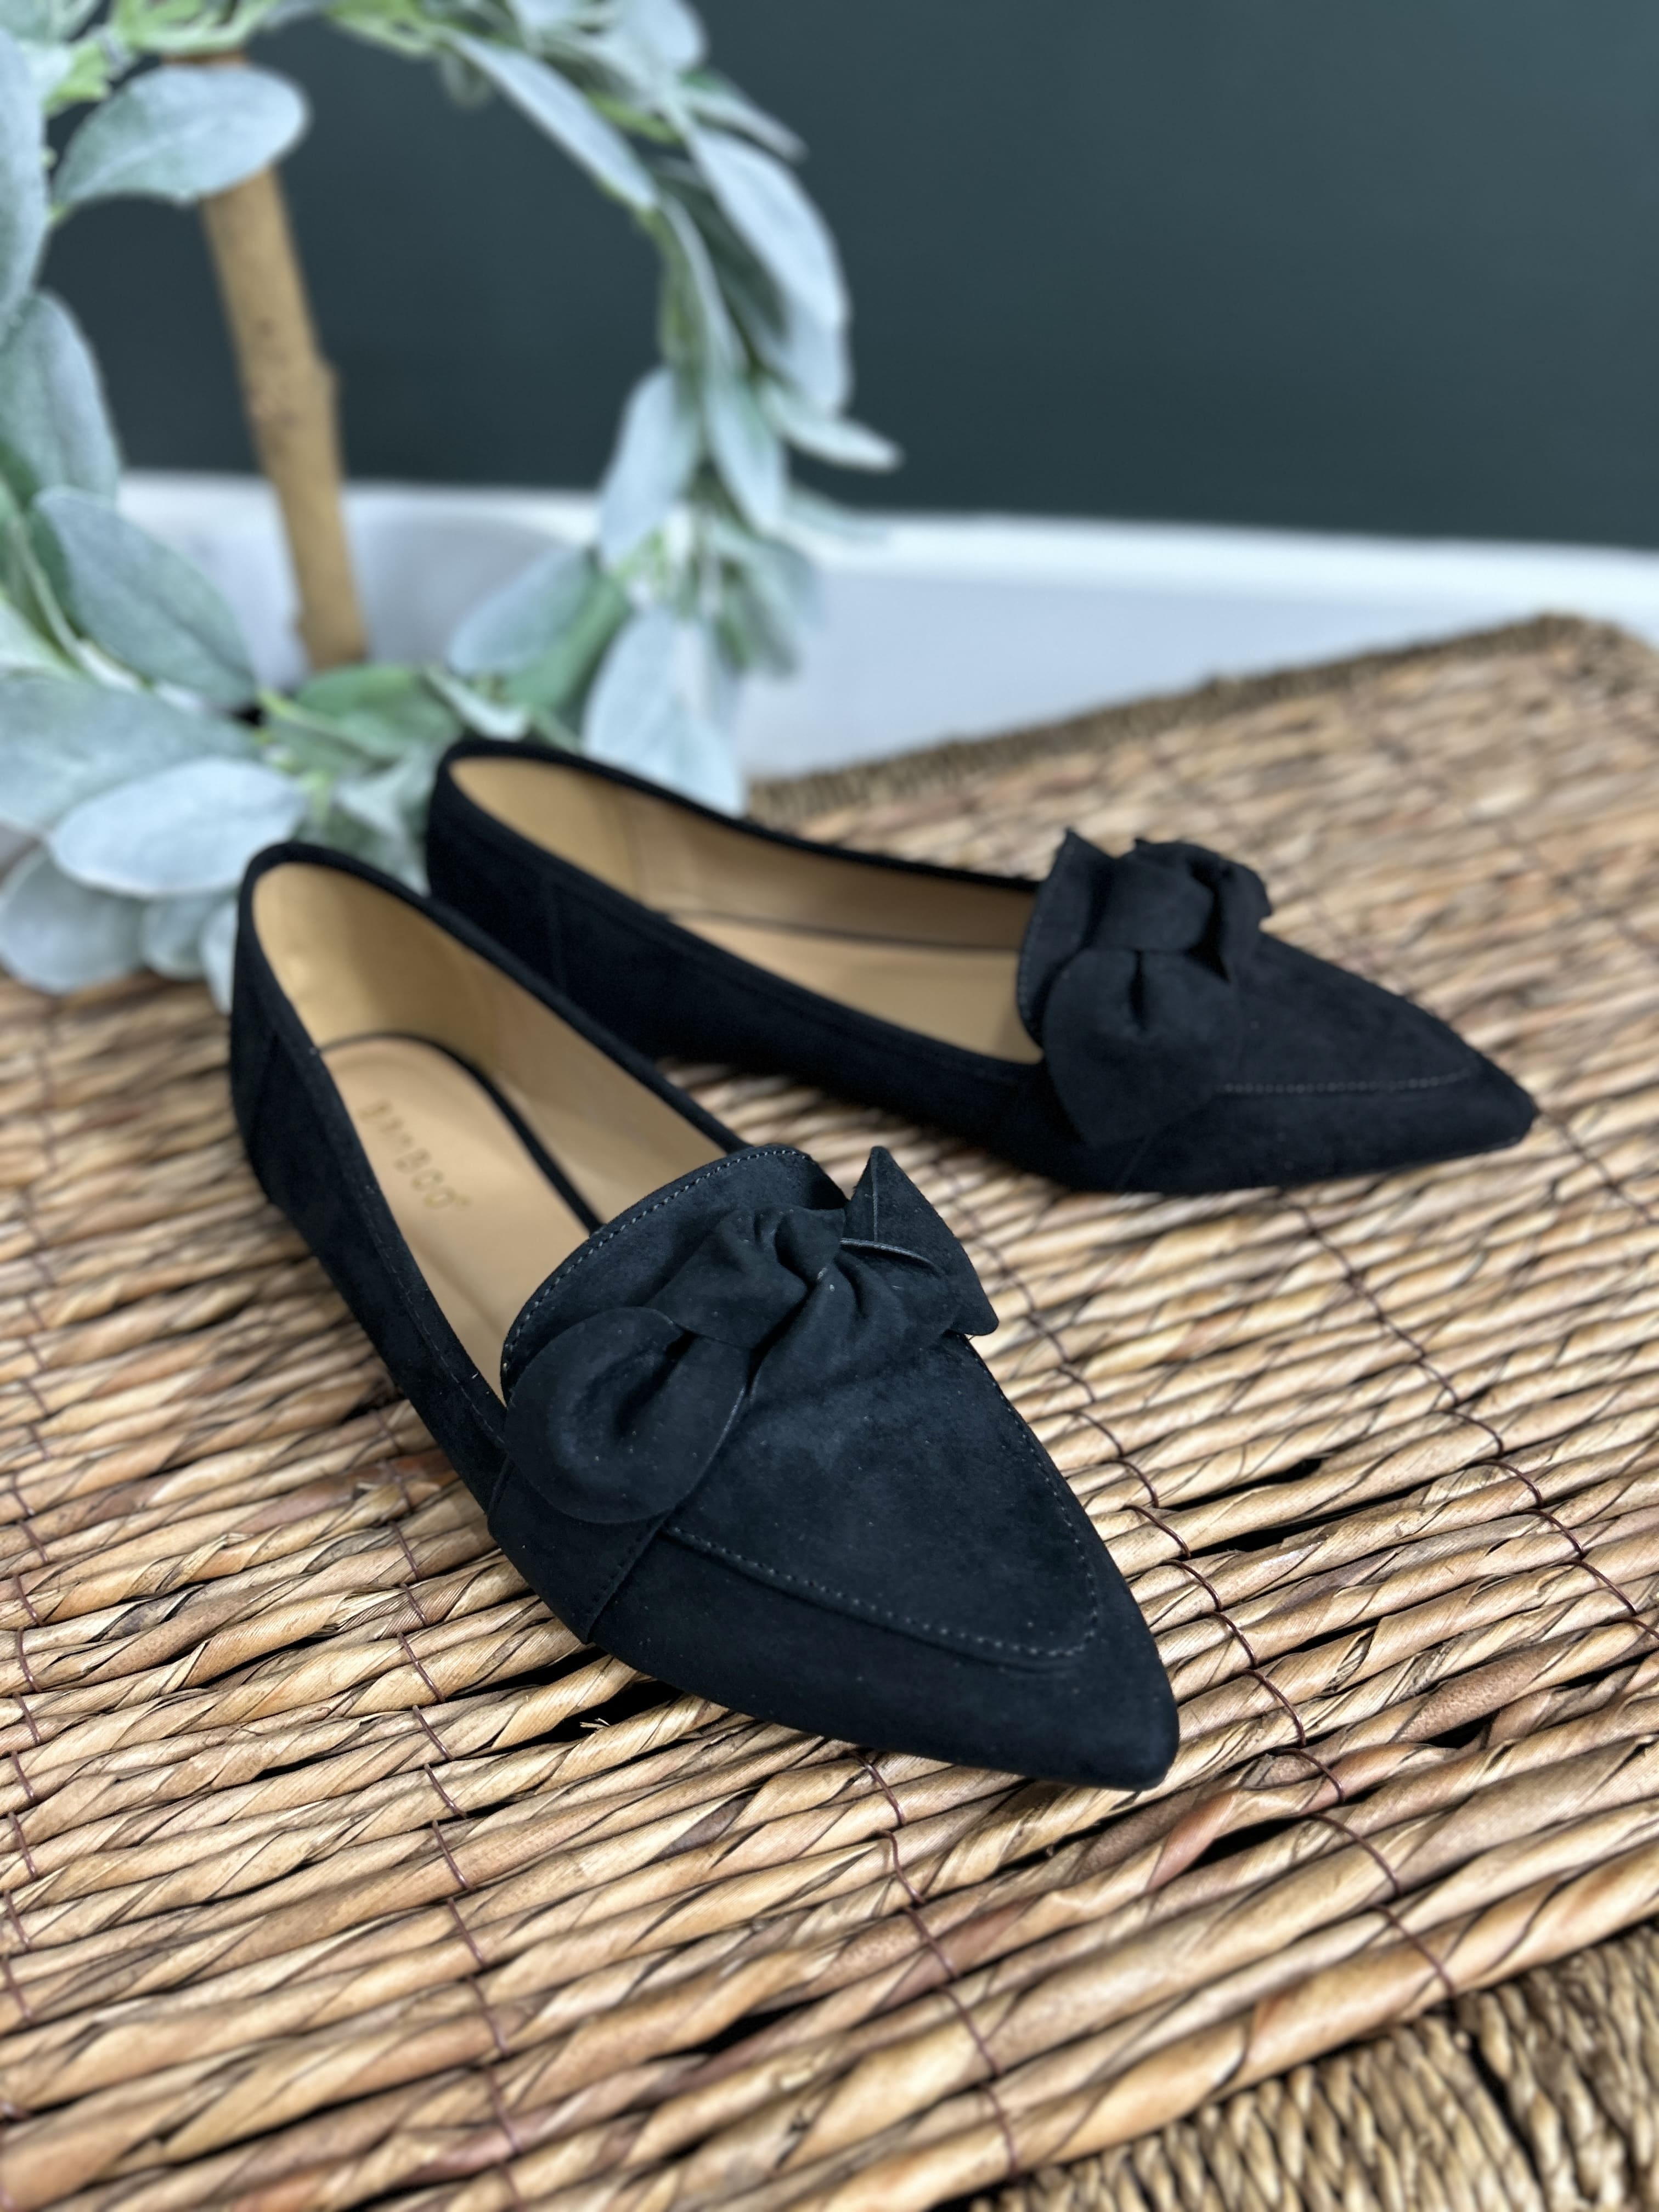 Women's Kimberly black slip on flats front view of detailing with bow accent and pointed toe.